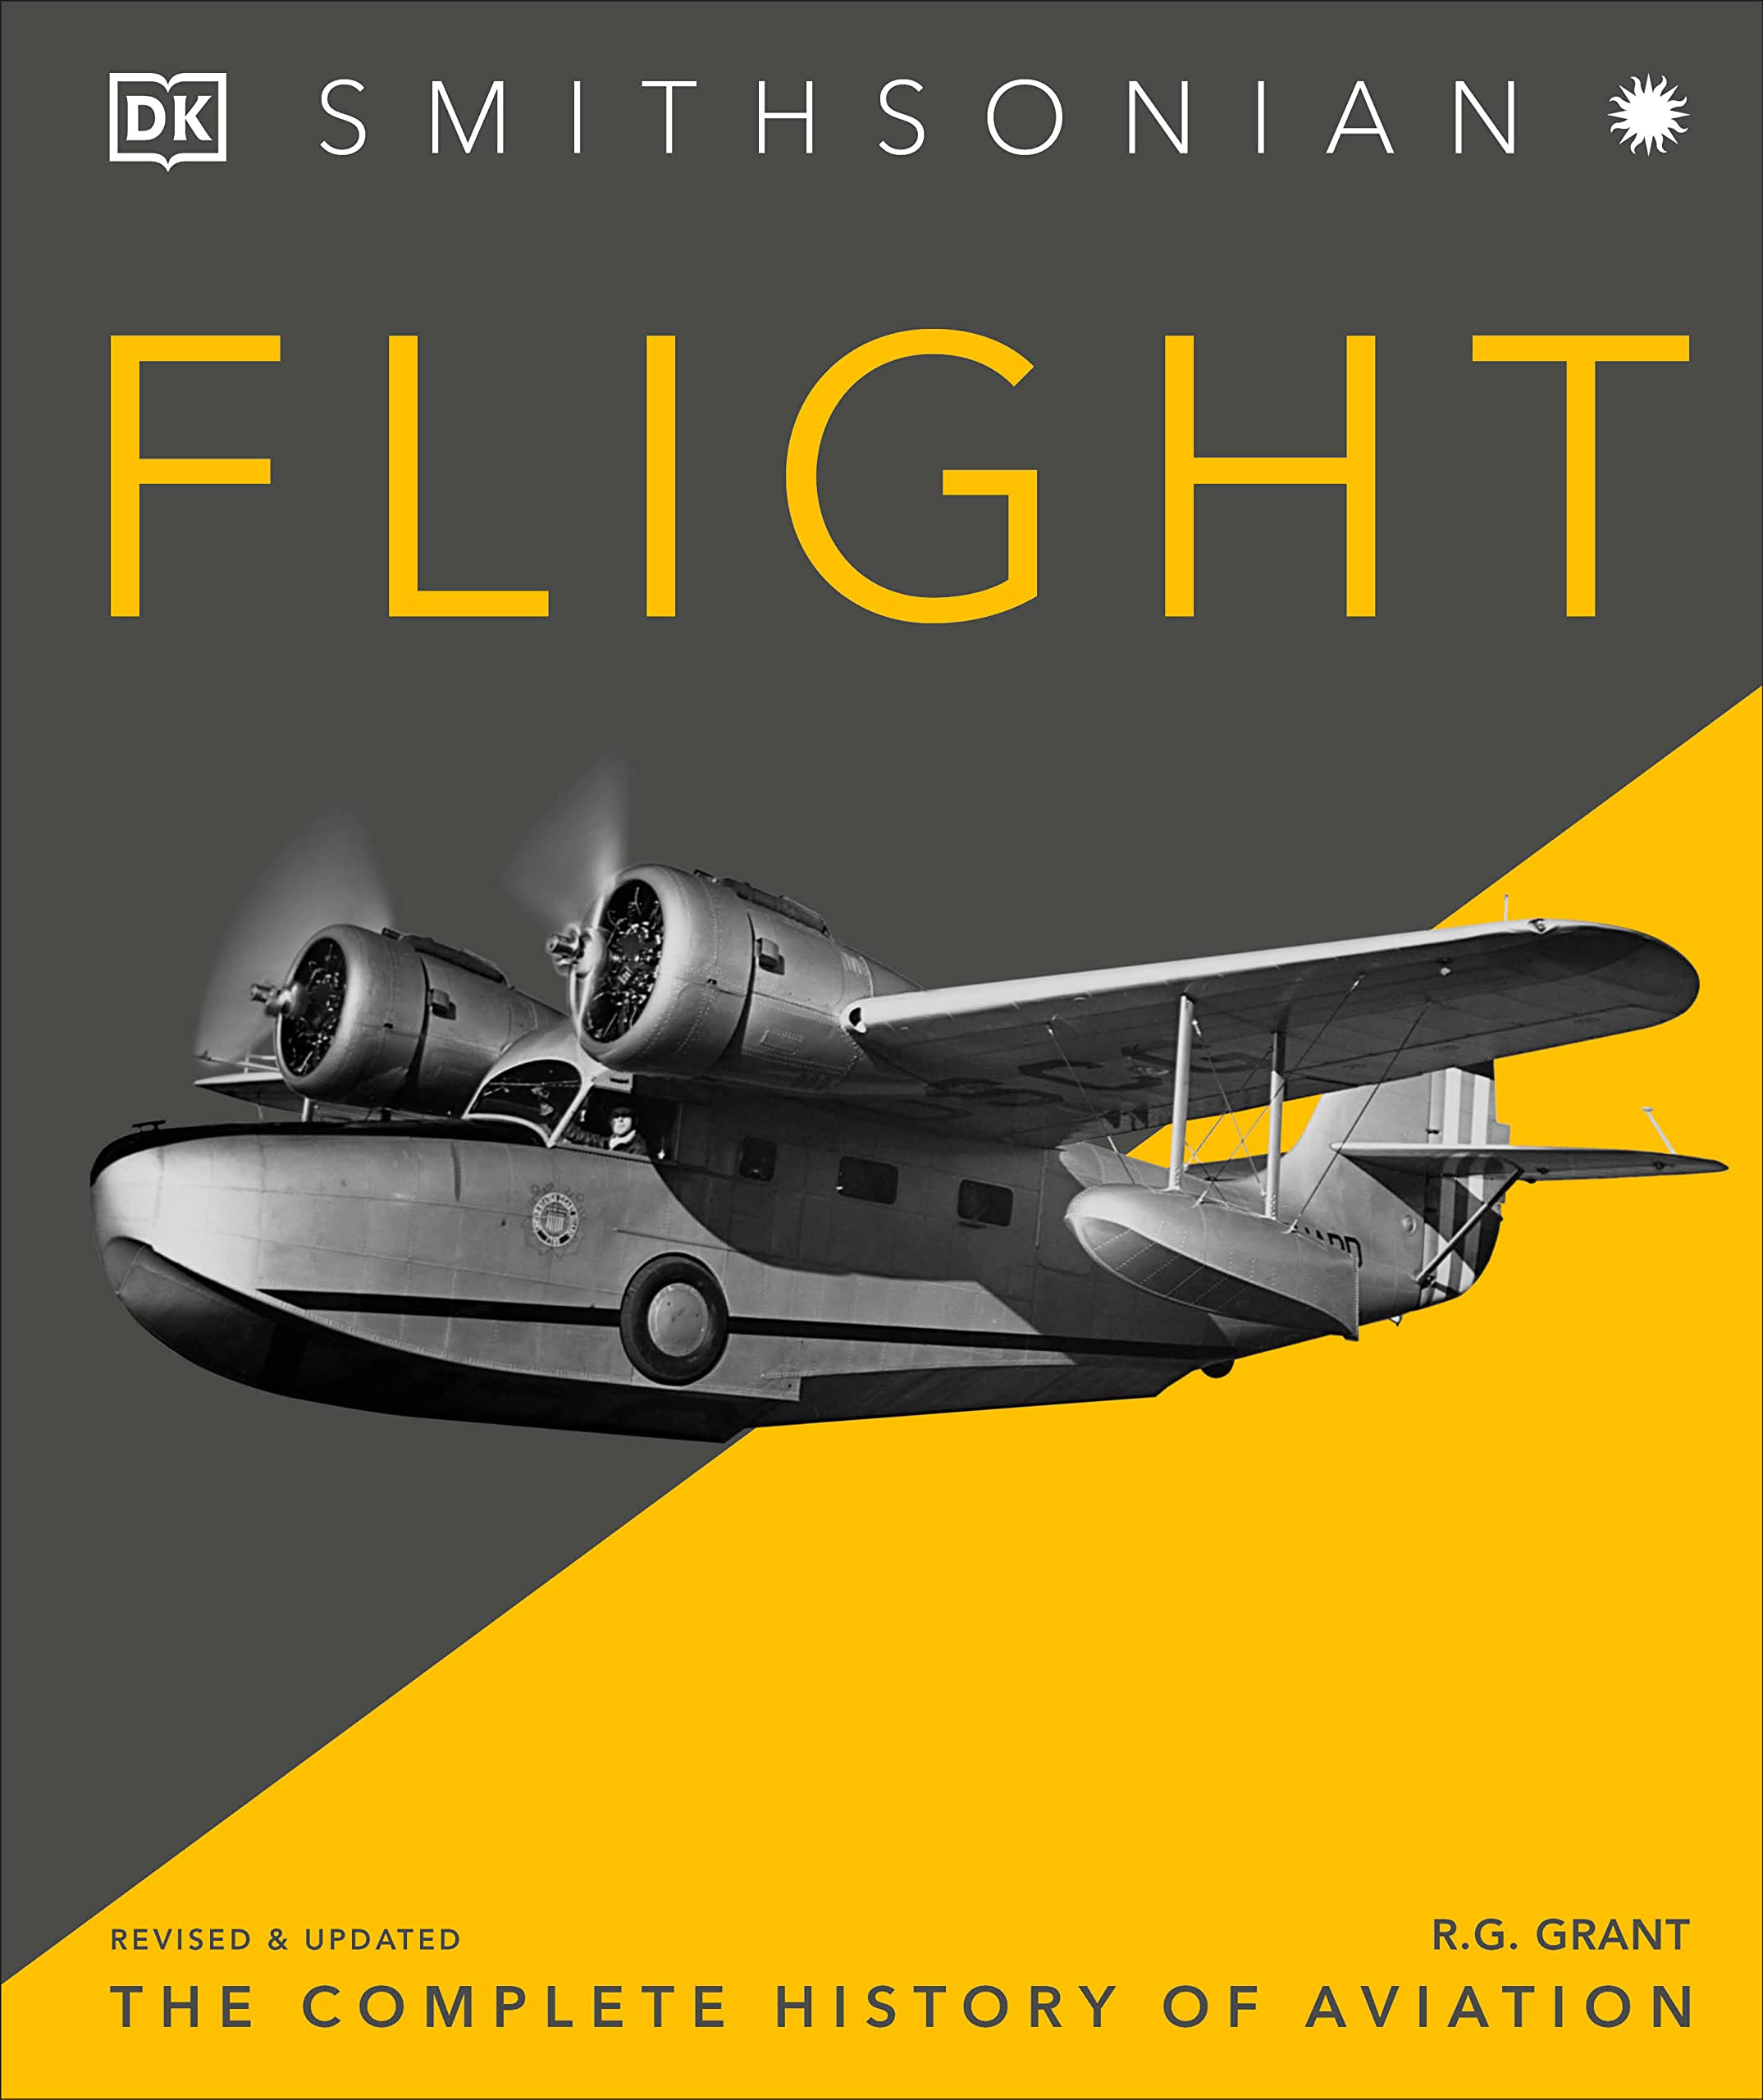 flight the complete history of aviation dk smithsonian